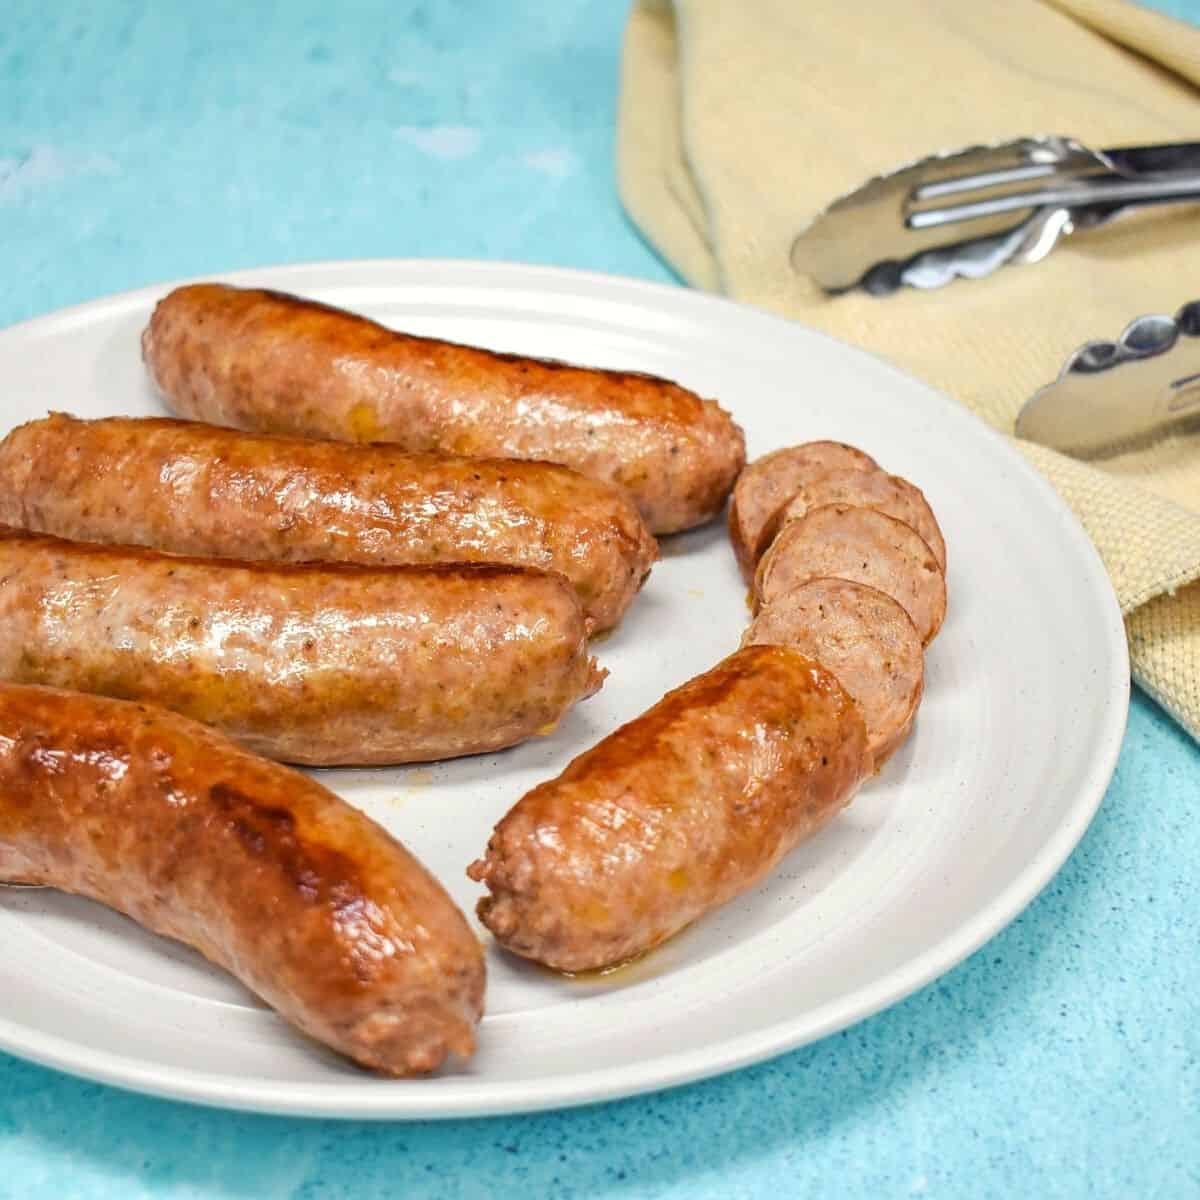 https://www.cook2eatwell.com/wp-content/uploads/2021/08/skillet-italian-sausage-image-2a.jpg